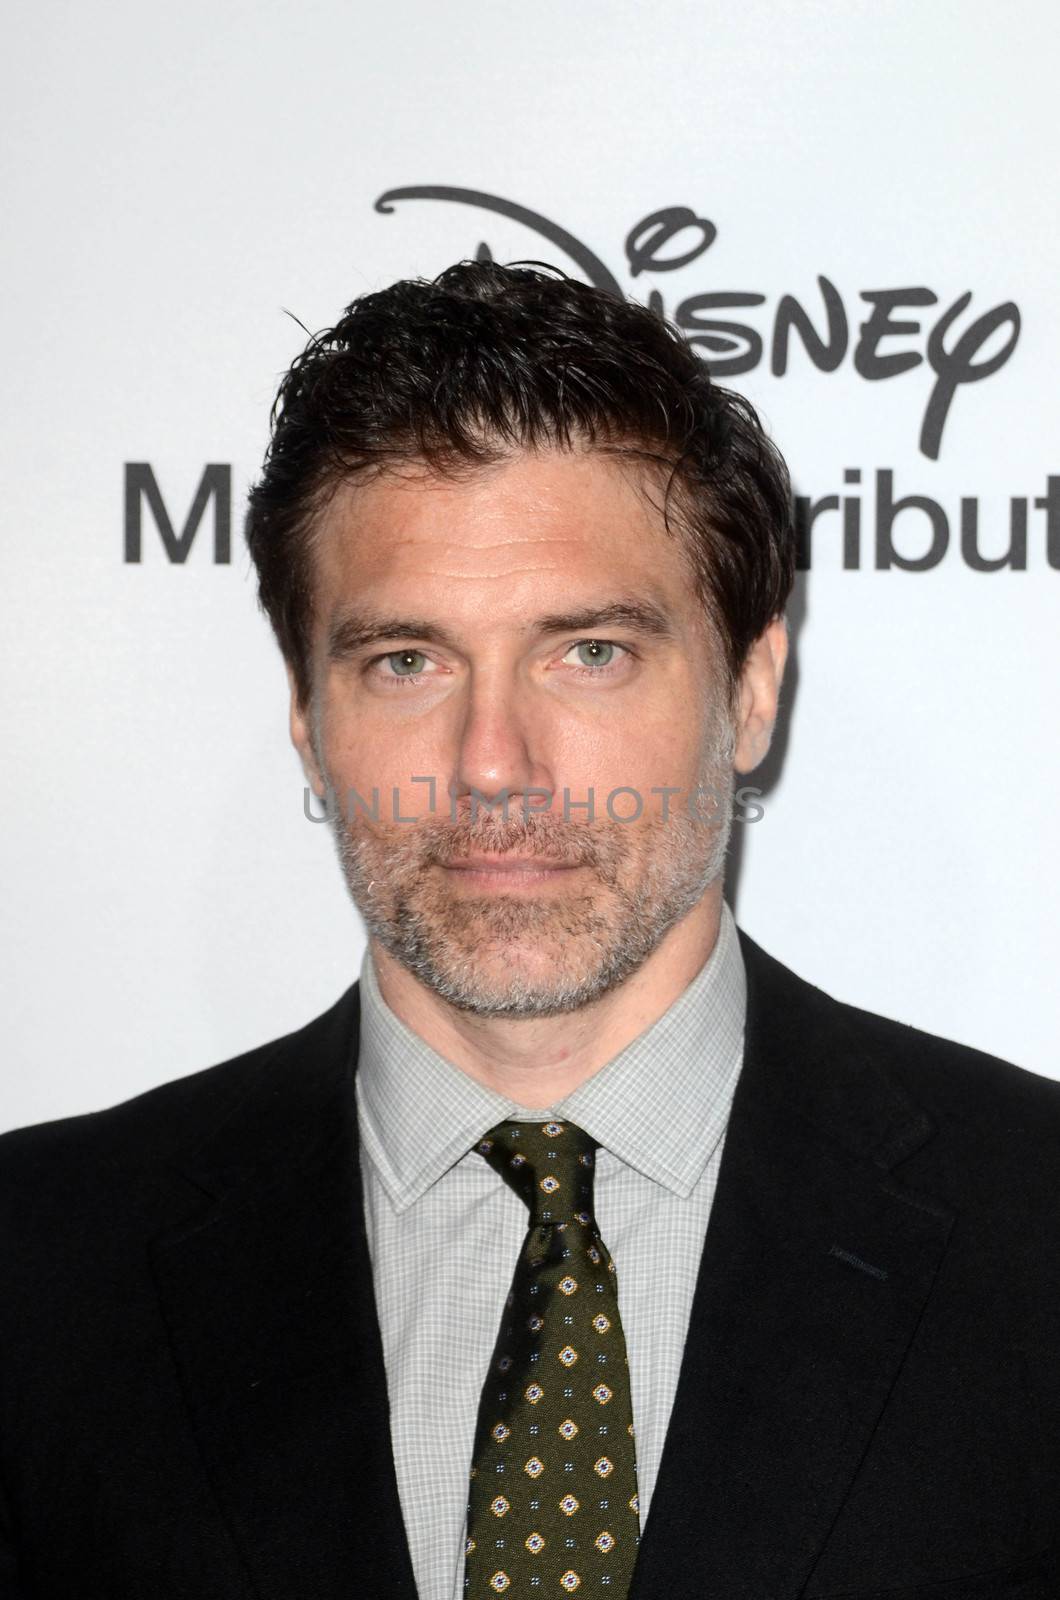 Anson Mount
at the 2017 ABC International Upfronts, Disney Studios, Burbank, CA 05-21-17/ImageCollect by ImageCollect